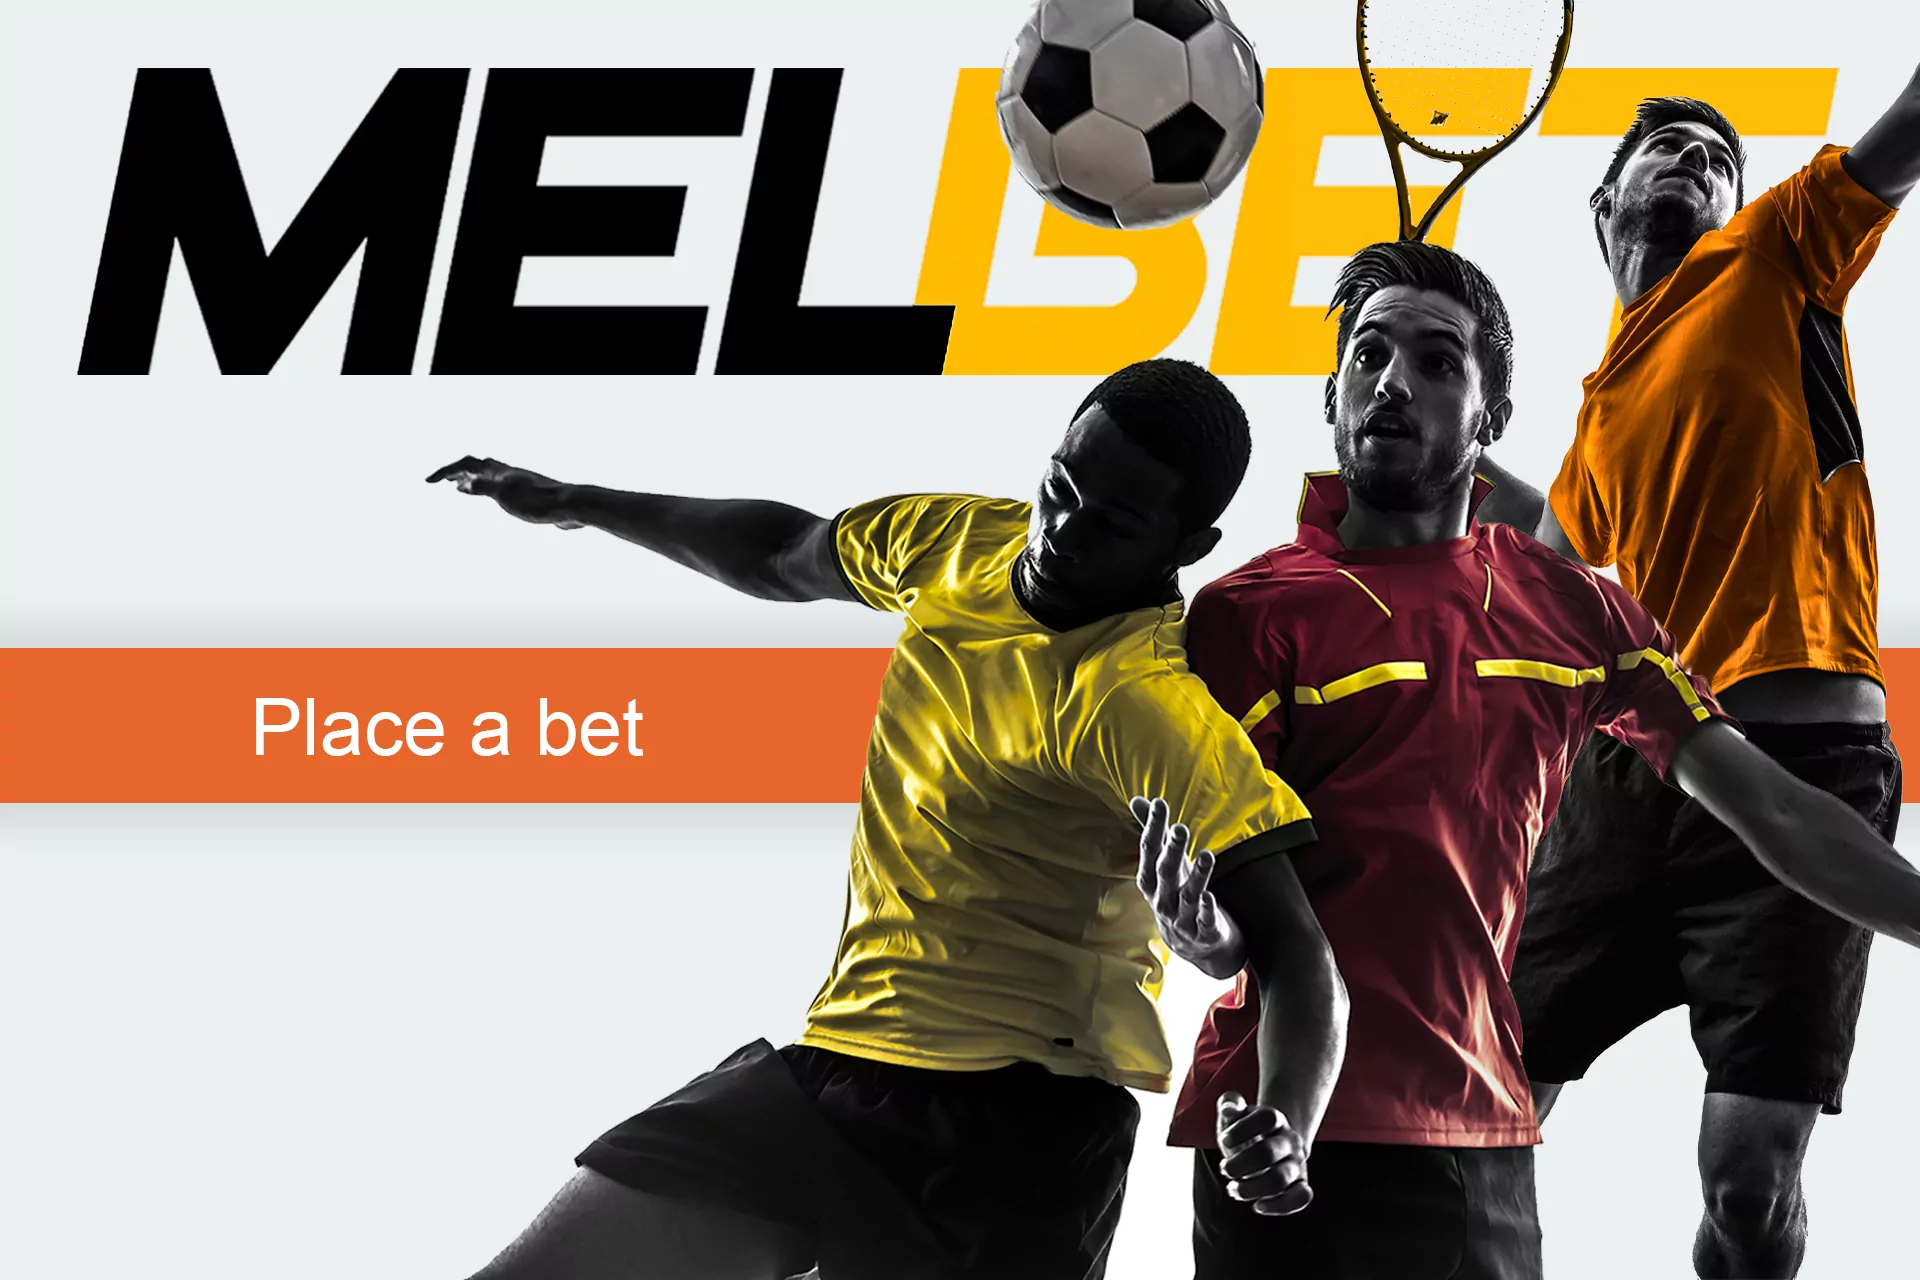 You can bet on a variety of sports at Melbet.